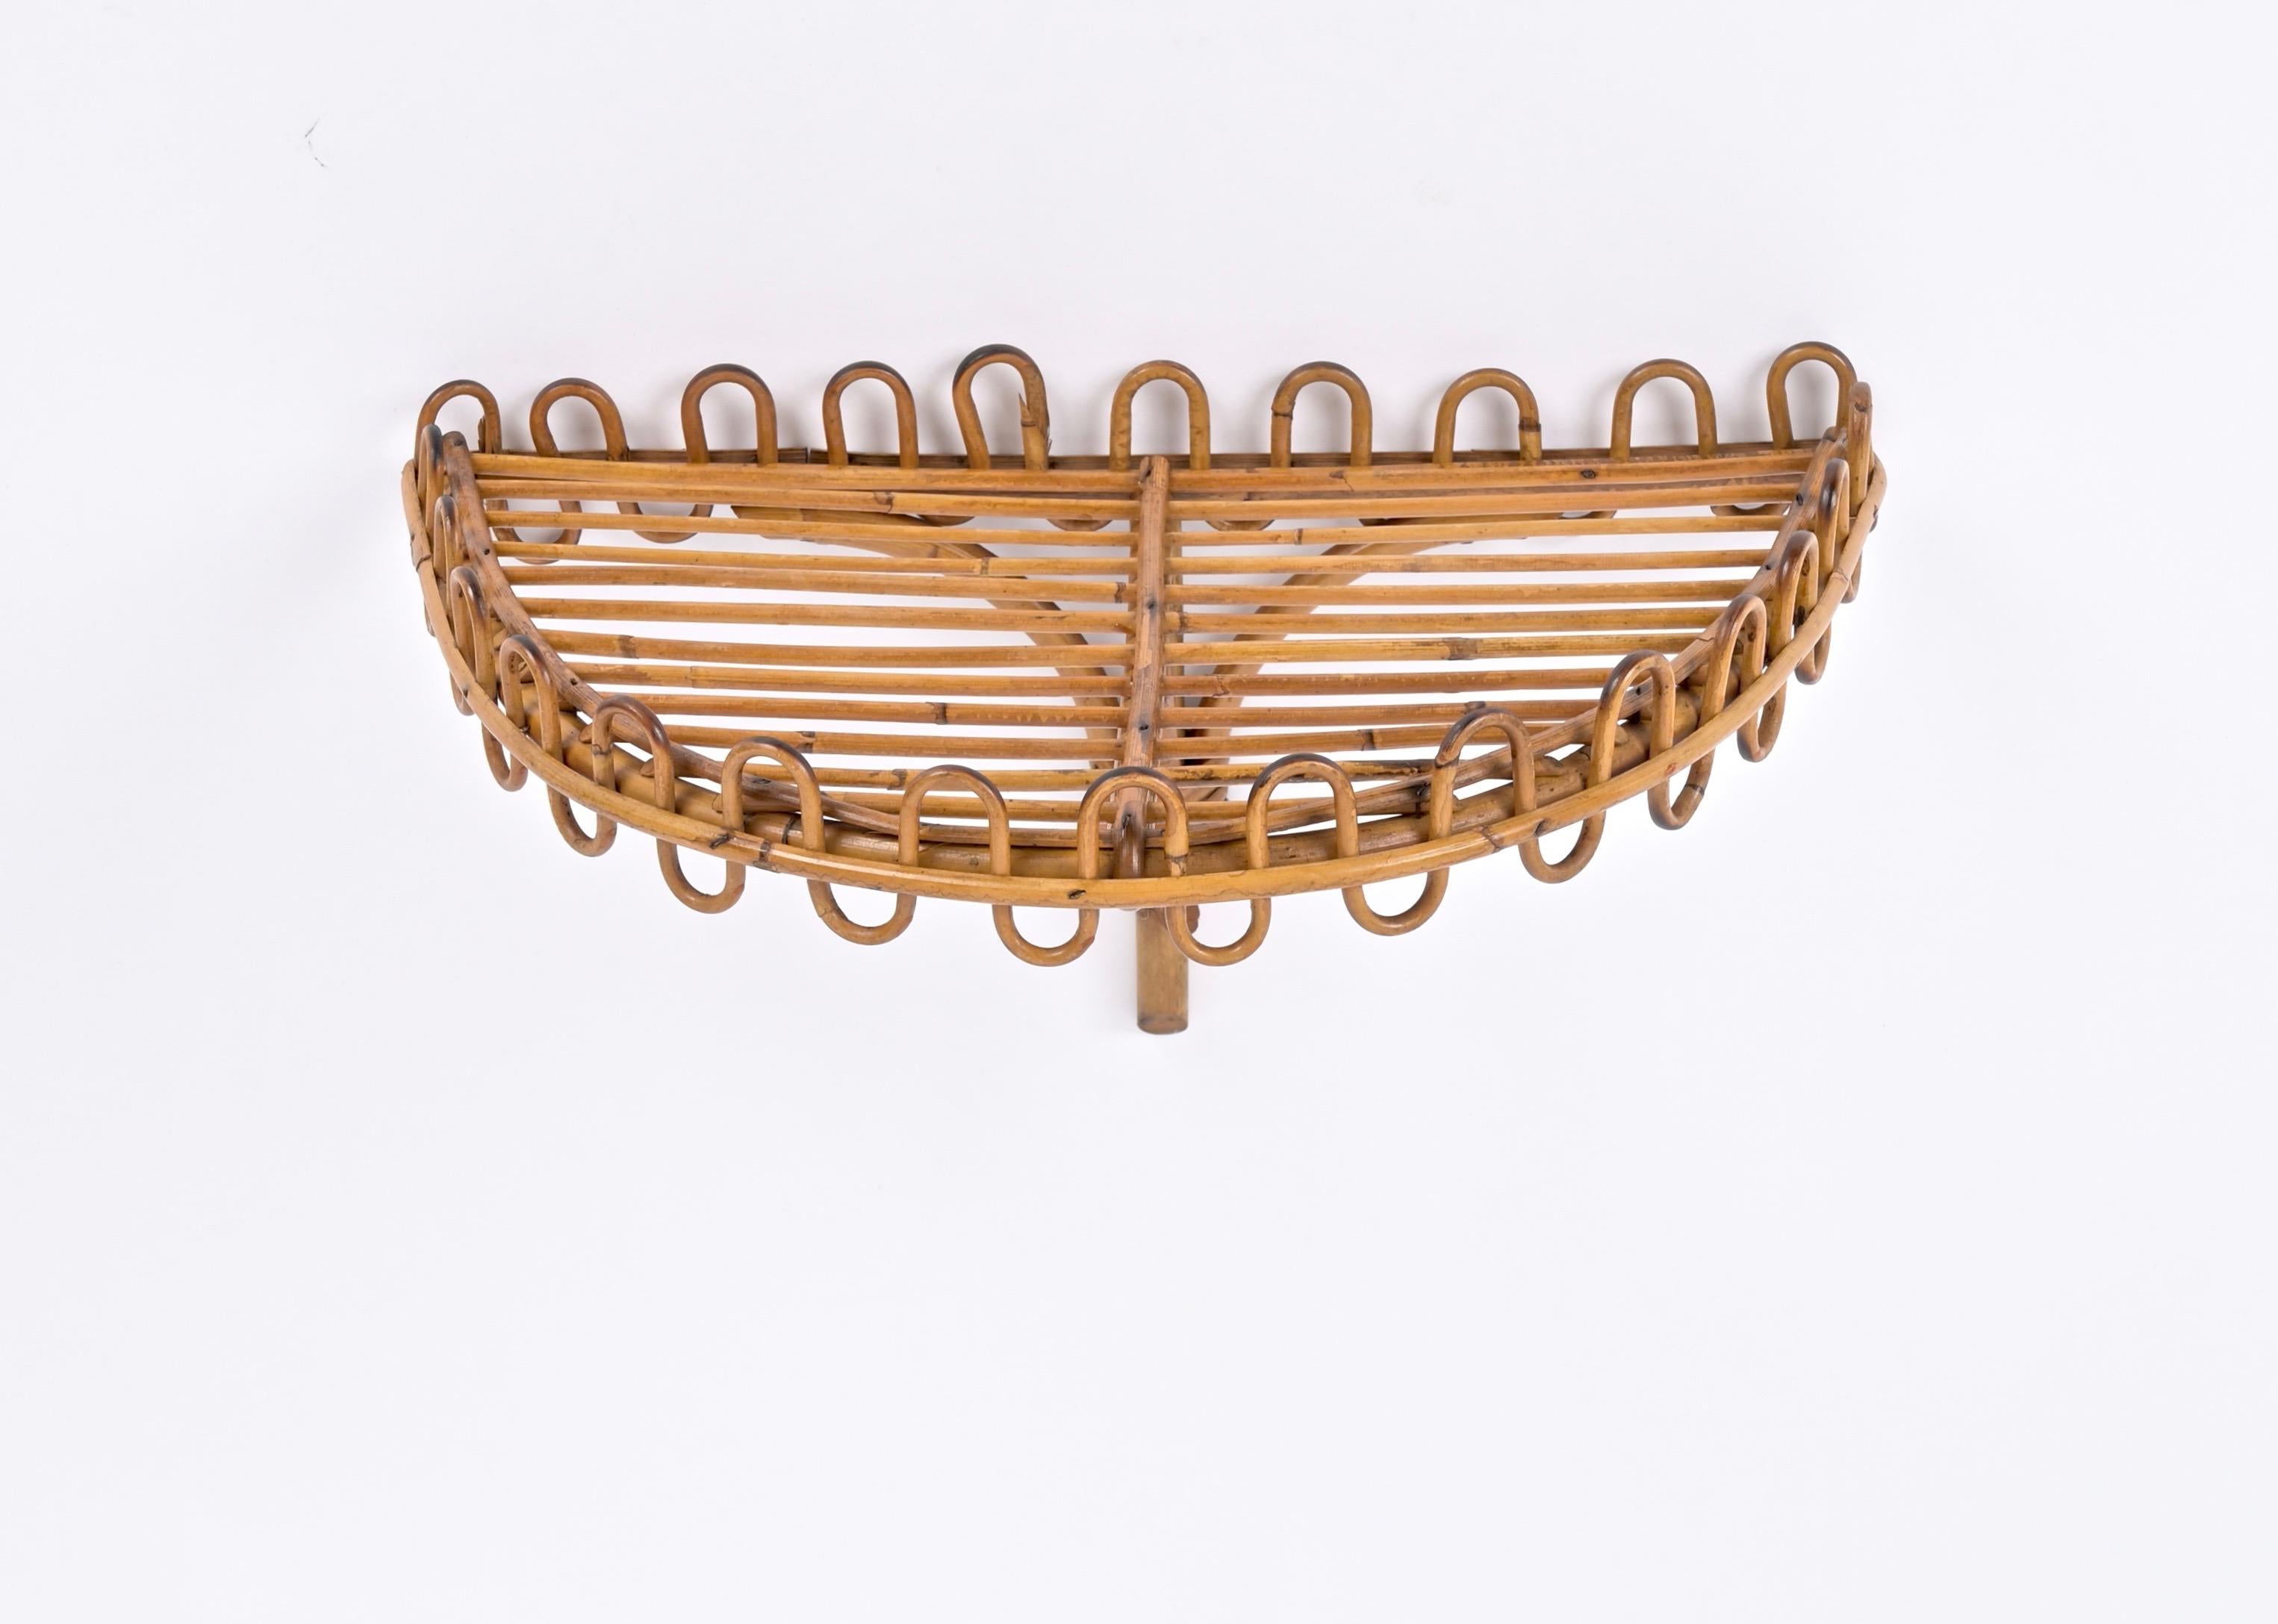 Extraordinary Mid-Century wall shelf in curved rattan, bamboo and wicker. This marvellous object was made in Italy in the 1960s and is attributed to the mastery of Franco Albini.

This fantastic shelf consist of an half-moon shaped shelf mounted